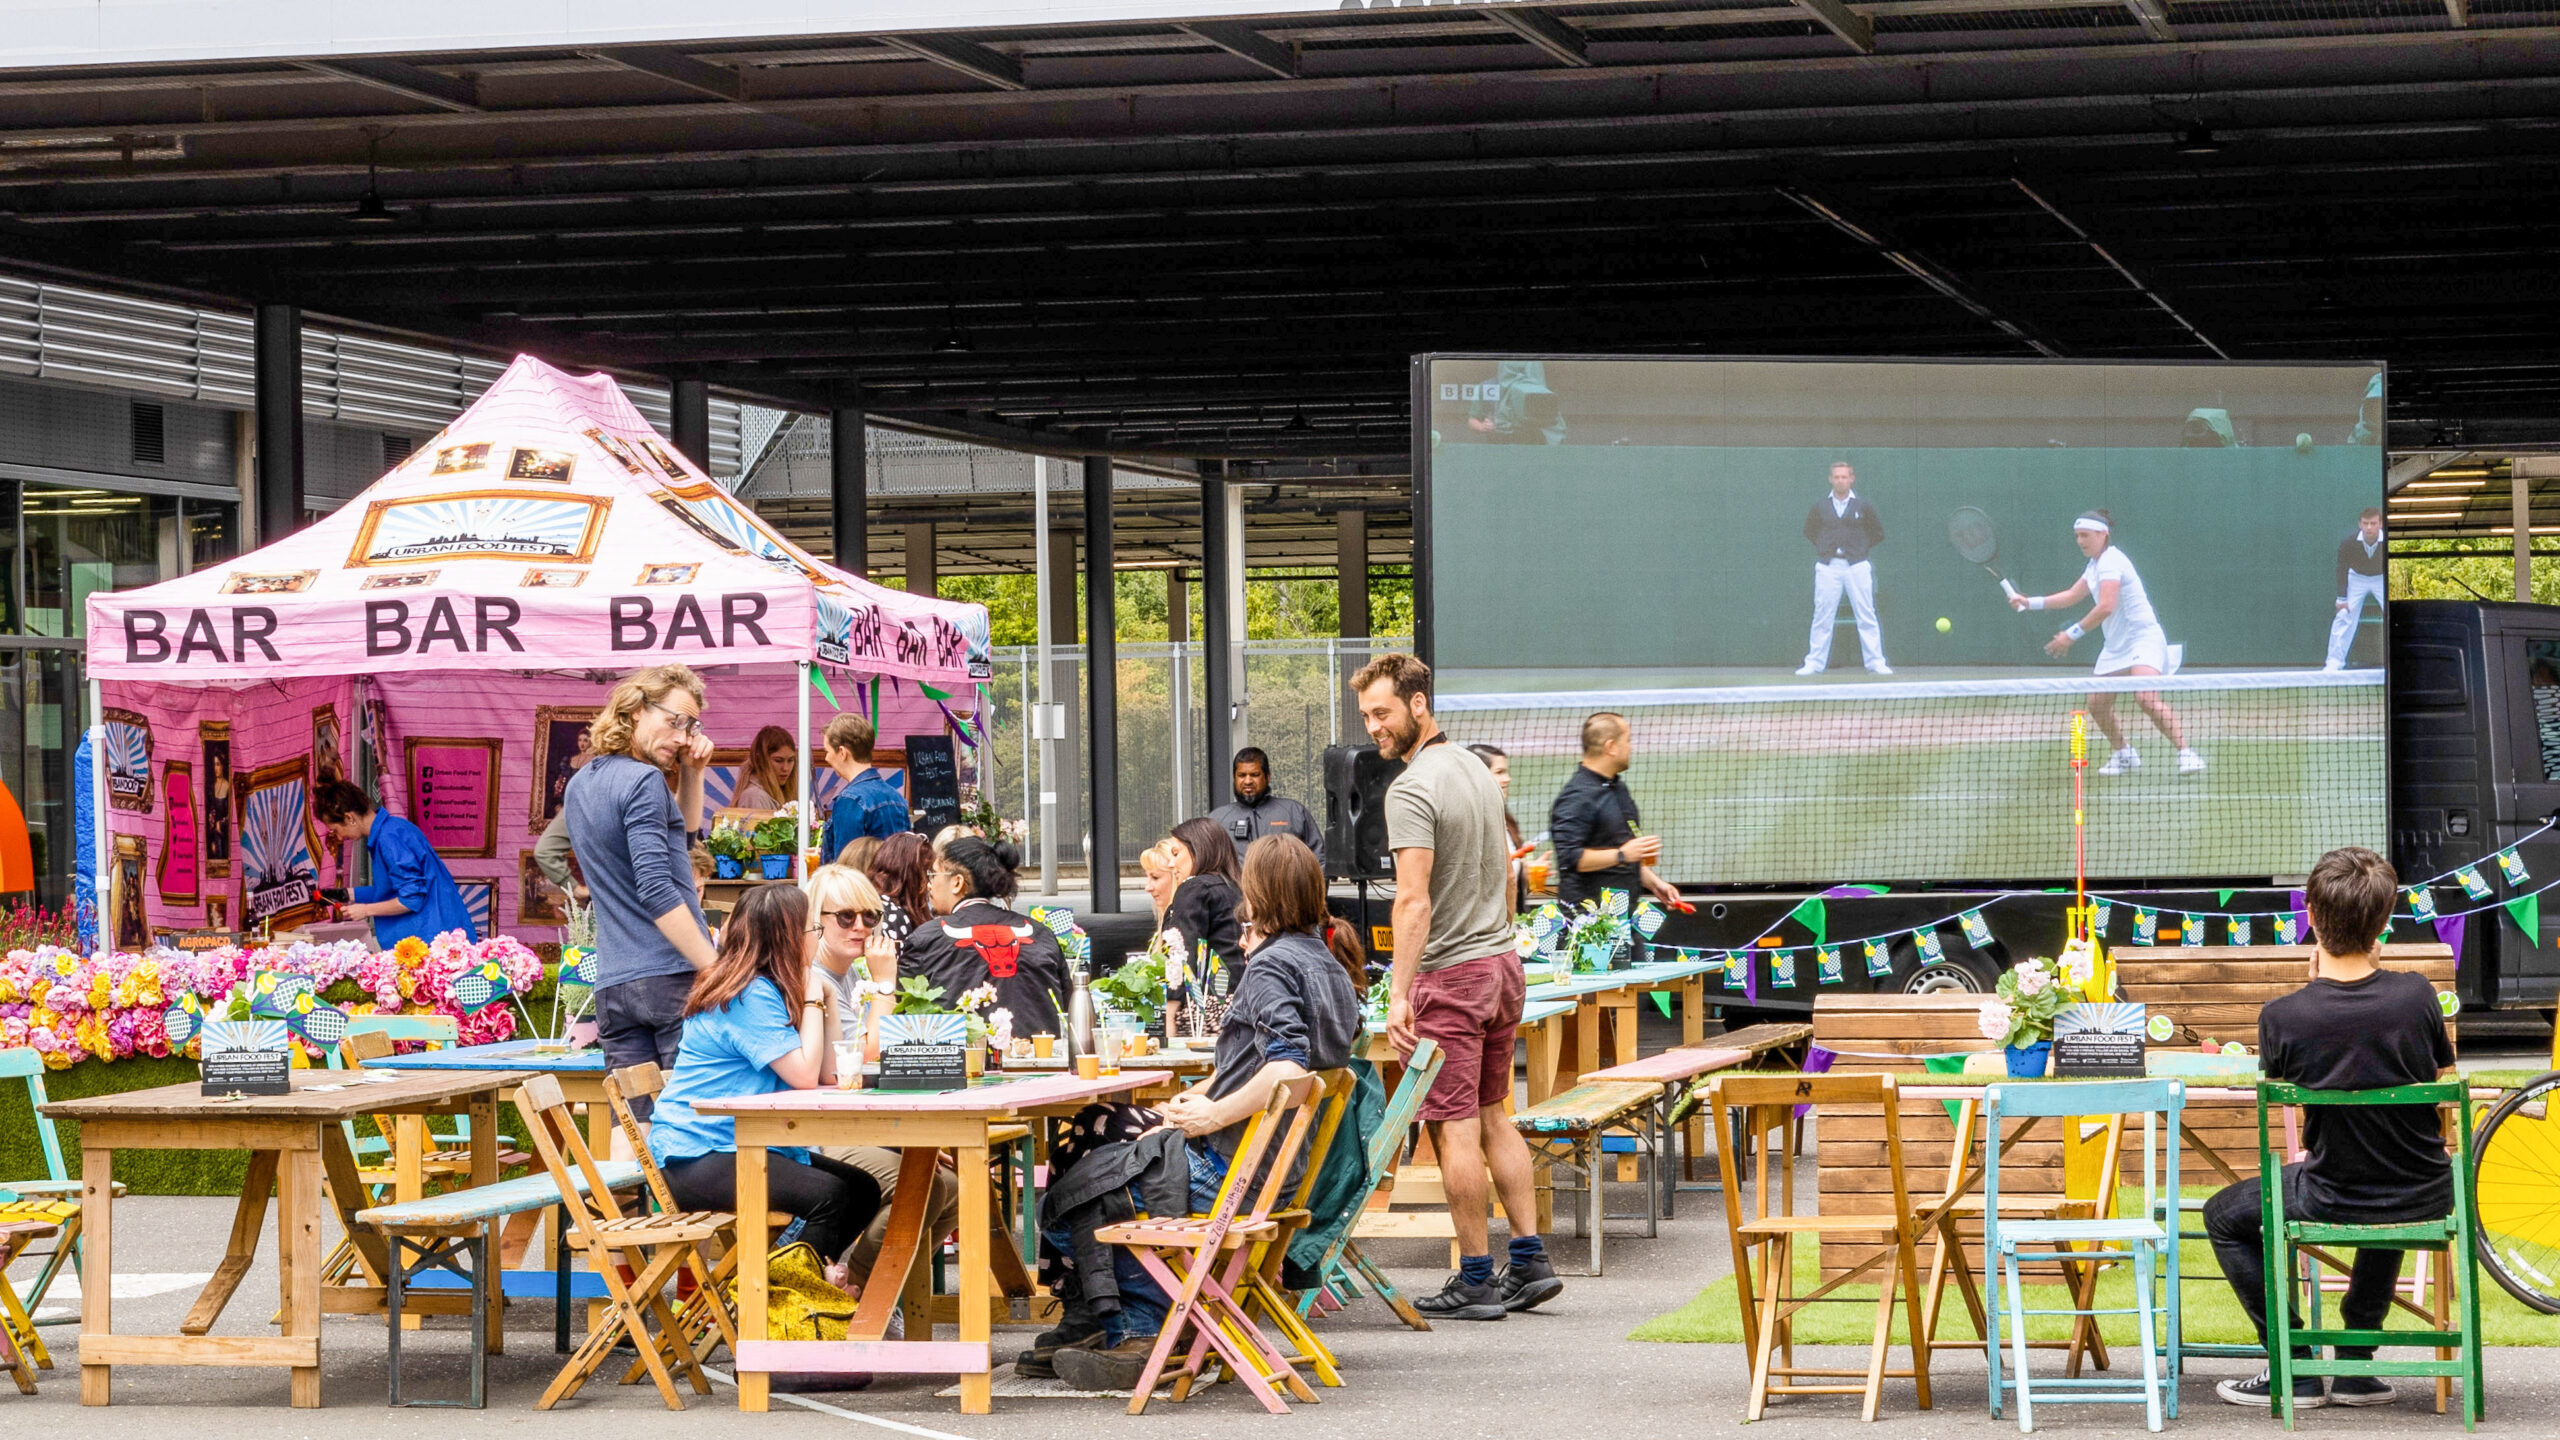 People watching tennis in outside event space